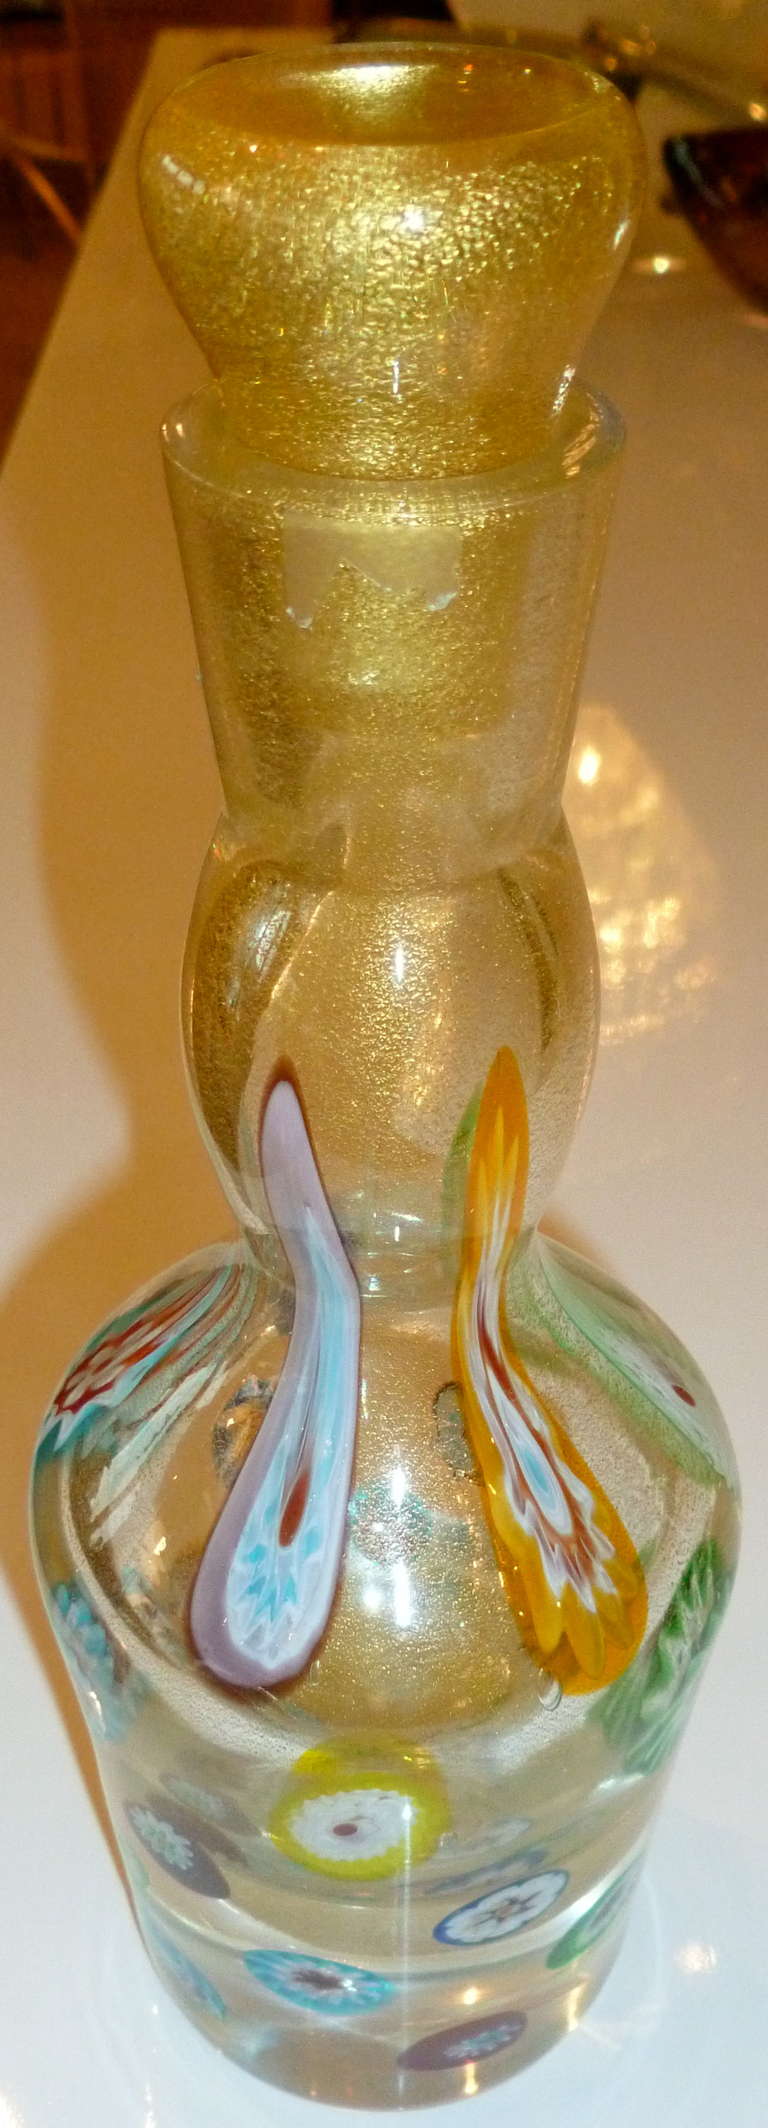 Mid-Century Modern Fratelli Toso Murano Glass Decanter Perfume Bottle Gold Aventurine and
Murrhines For Sale